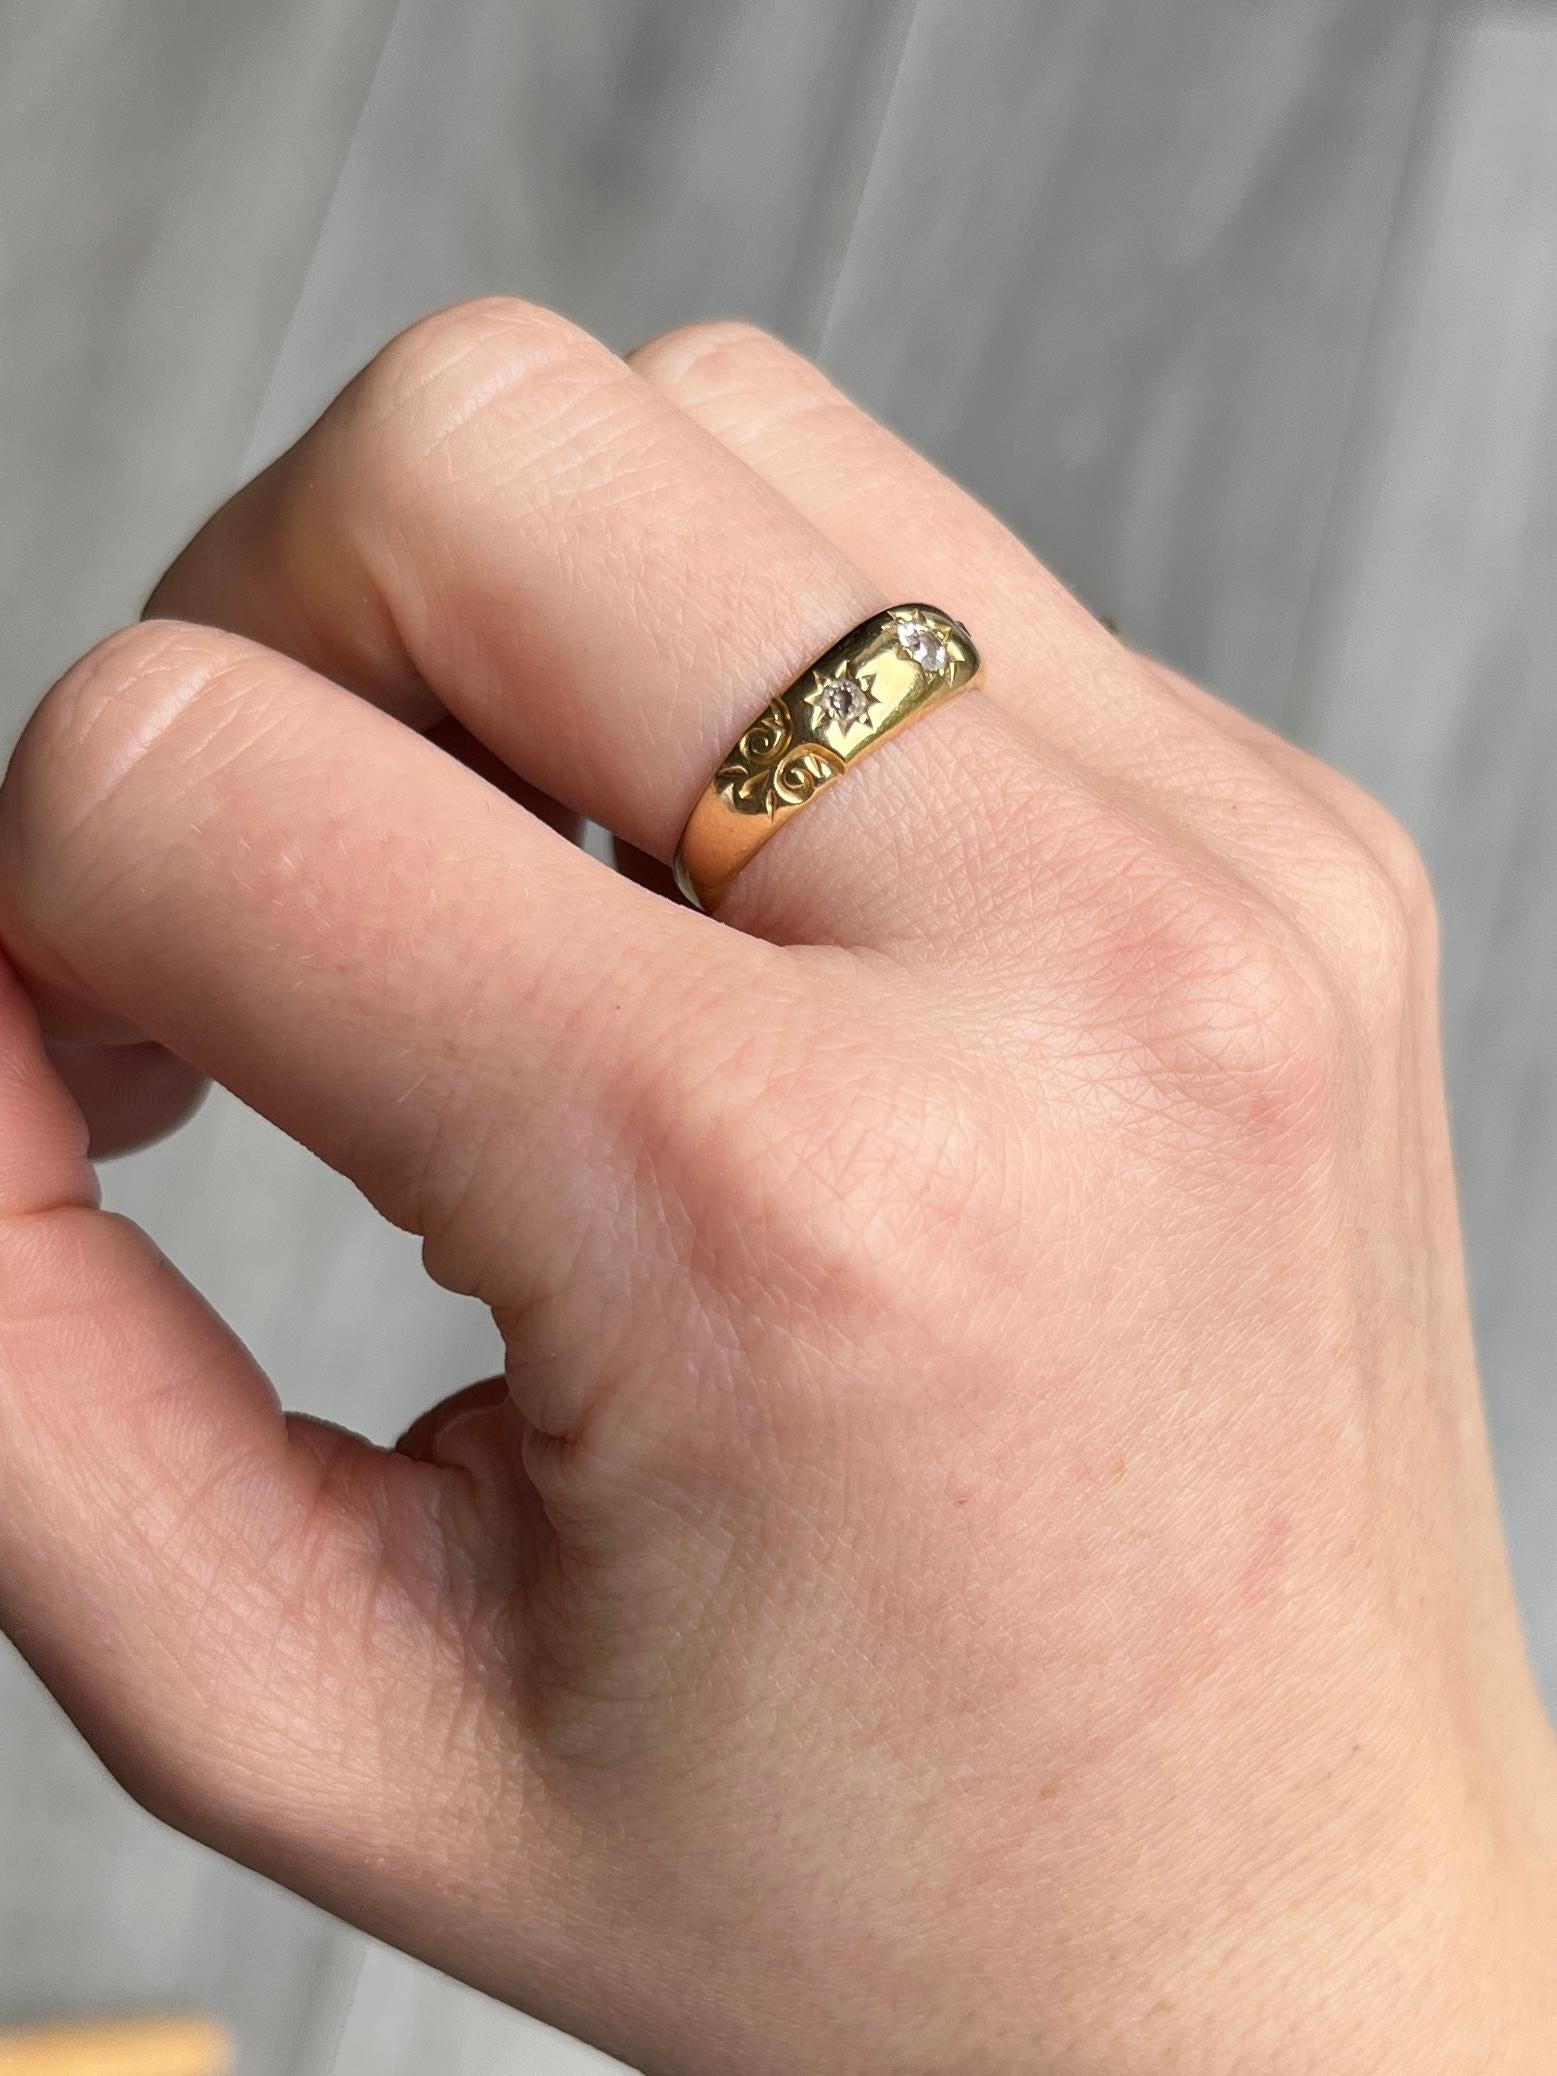 This gorgeous 18ct gold band holds three diamonds totalling 18pts. They are bright and have a lovely sparkle and are set in star settings. Fully hallmarked Birmingham 1893.

Ring Size:M 1/2 or 6 1/2
Band Width: 5.5mm 

Weight: 3.1g